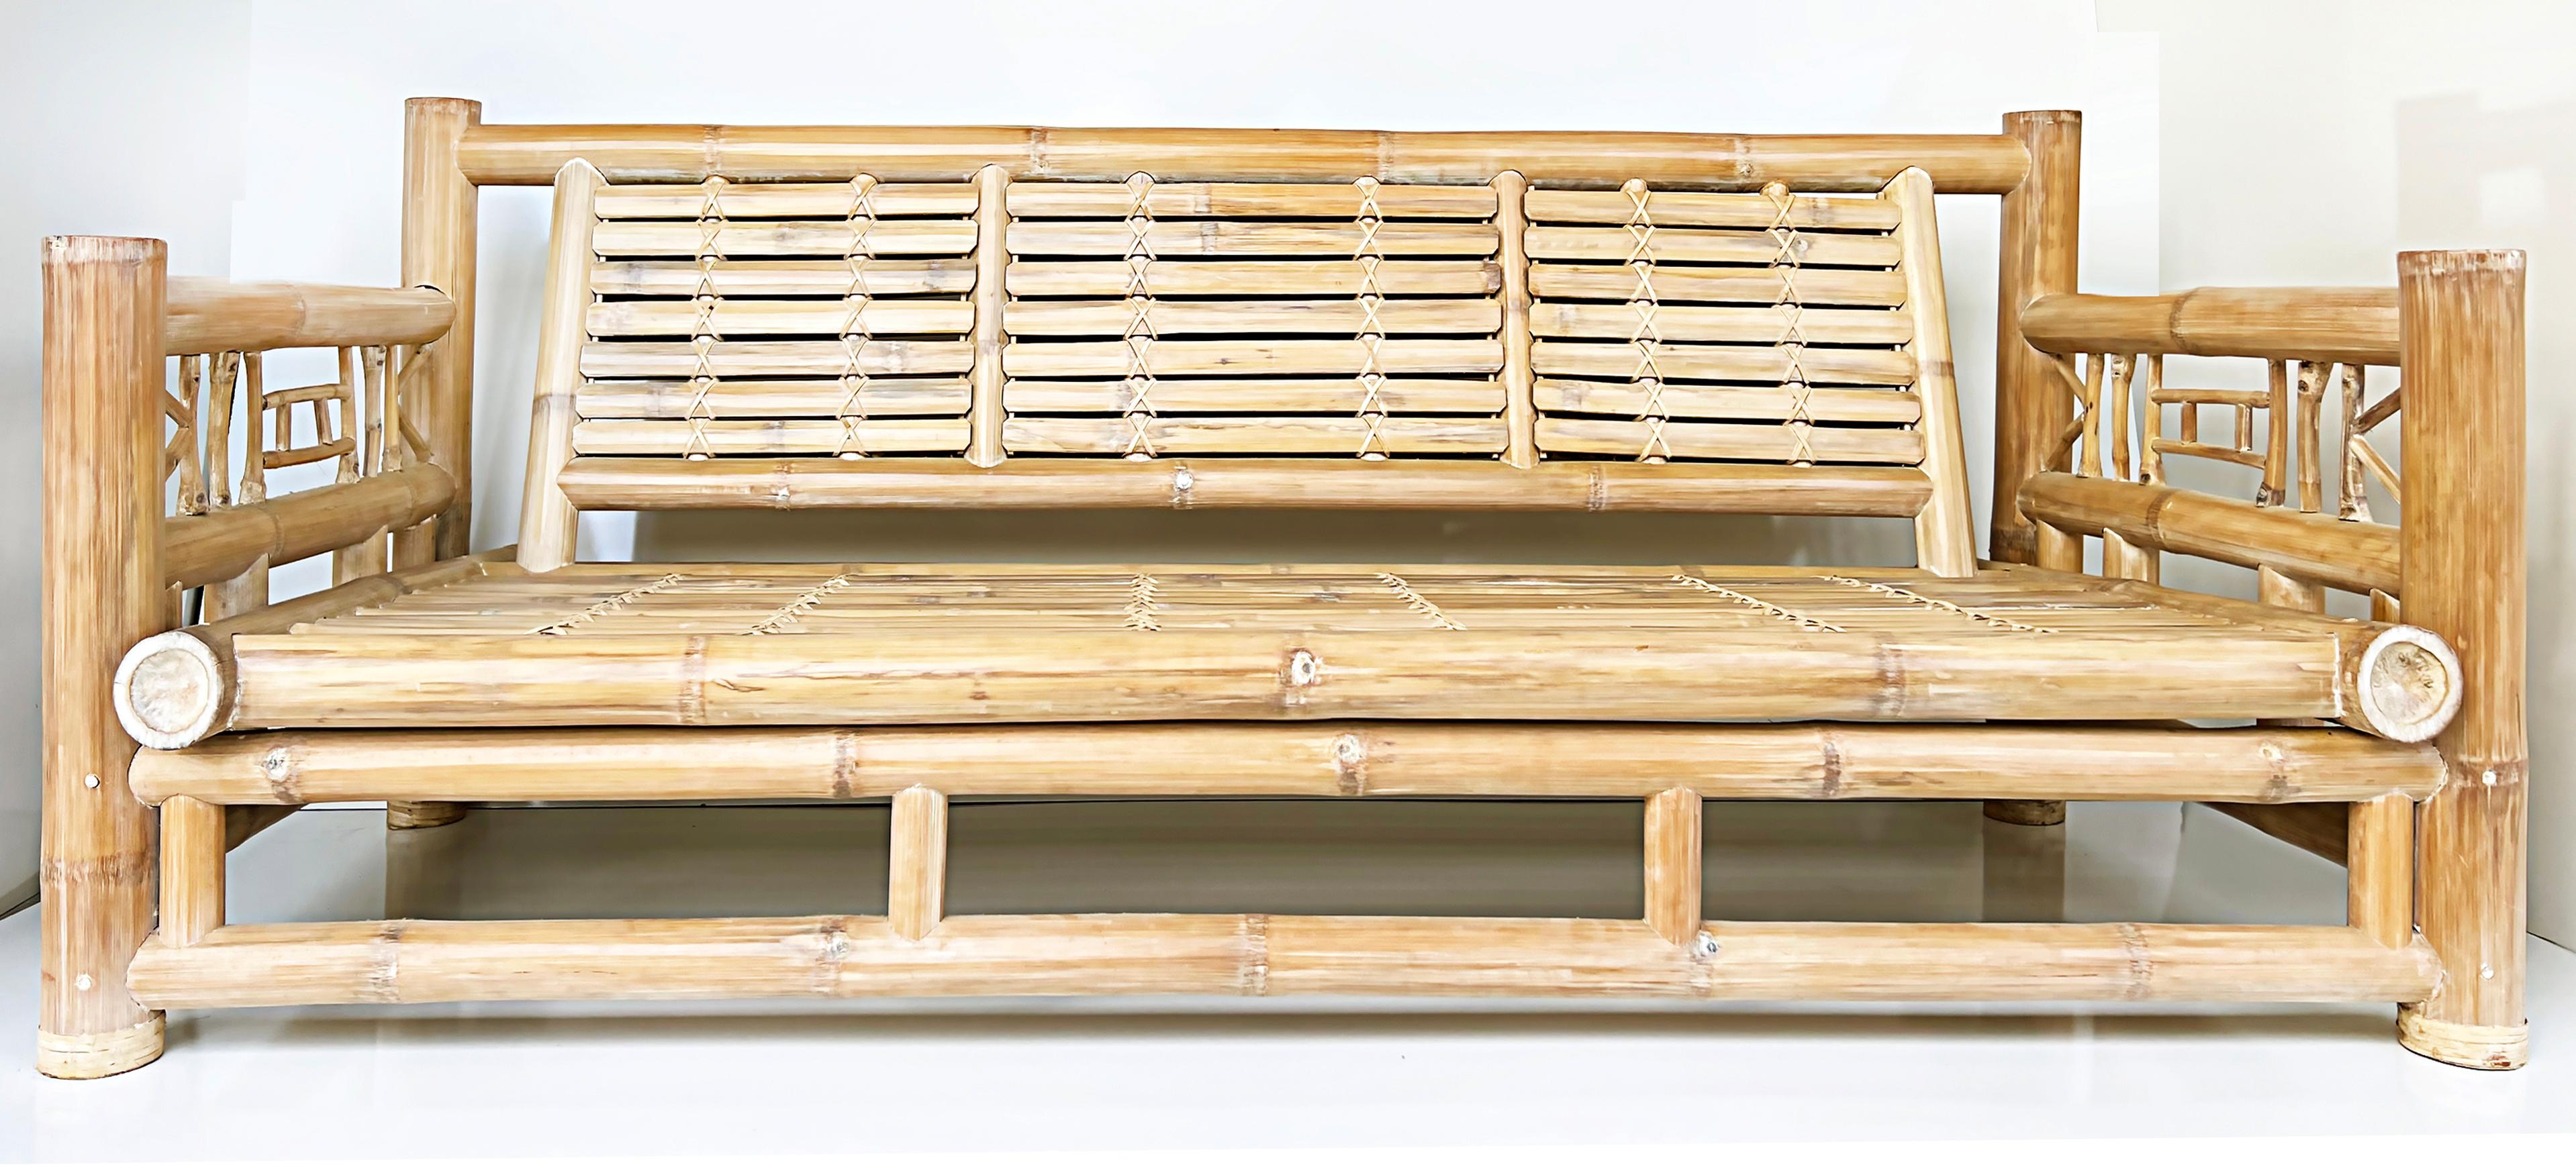 
Vintage Budji Layug Style Vintage Coastal Bamboo Sofa


Offered for sale is a vintage Coastal bamboo sofa in the manner of Antonio Budji Layug. The frame has a white-washed bamboo finish. The sofa does not have any cushions and can be fitted as